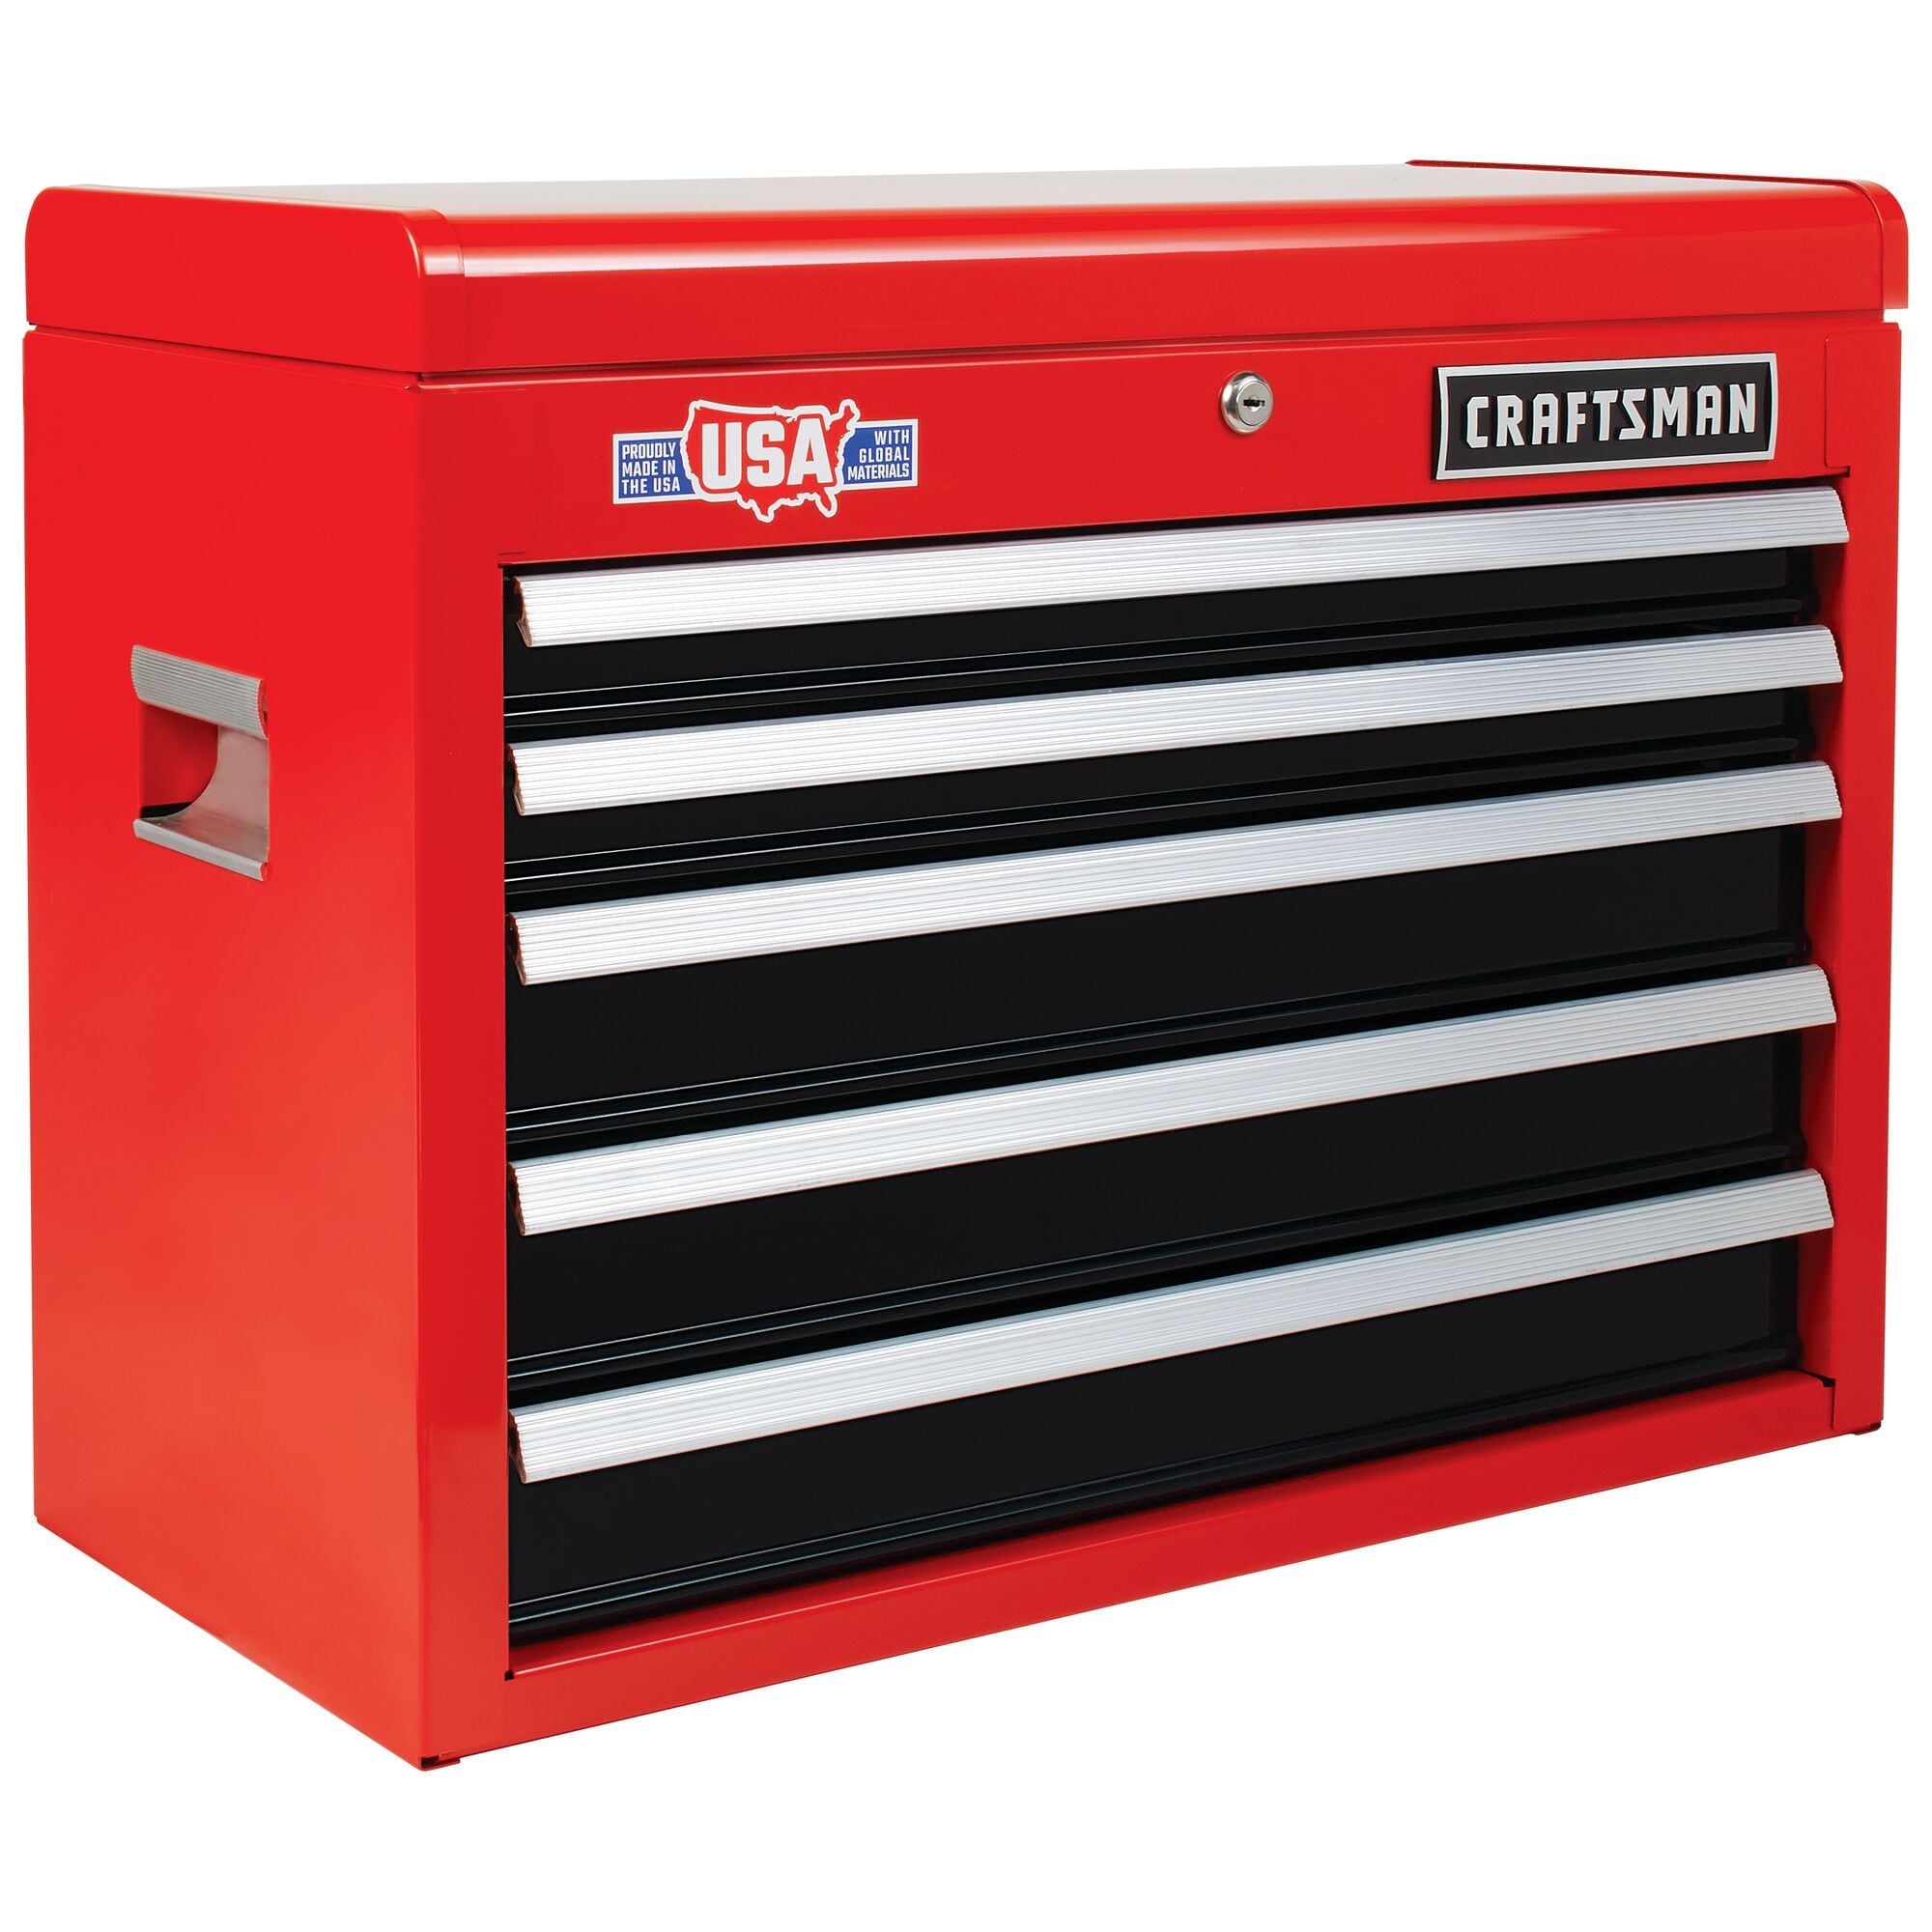 CRAFTSMAN 2000 Series 26-in W x 19.75-in H 5-Drawer Steel Tool Chest ...